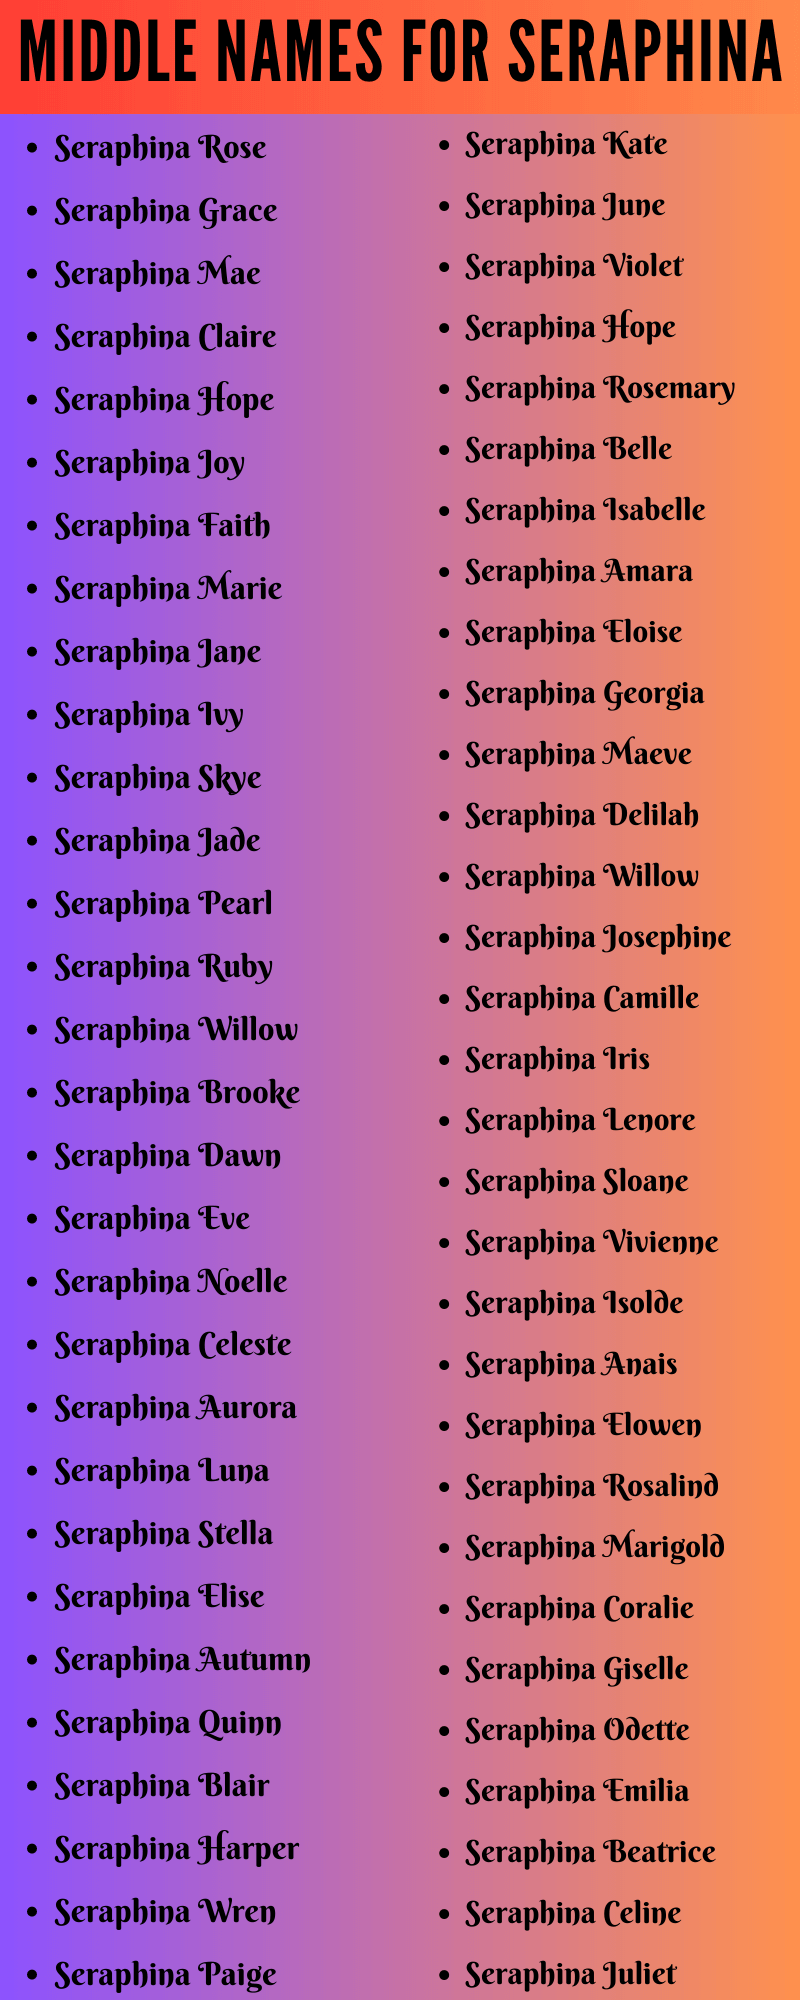 400 Cute Middle Names For Seraphina